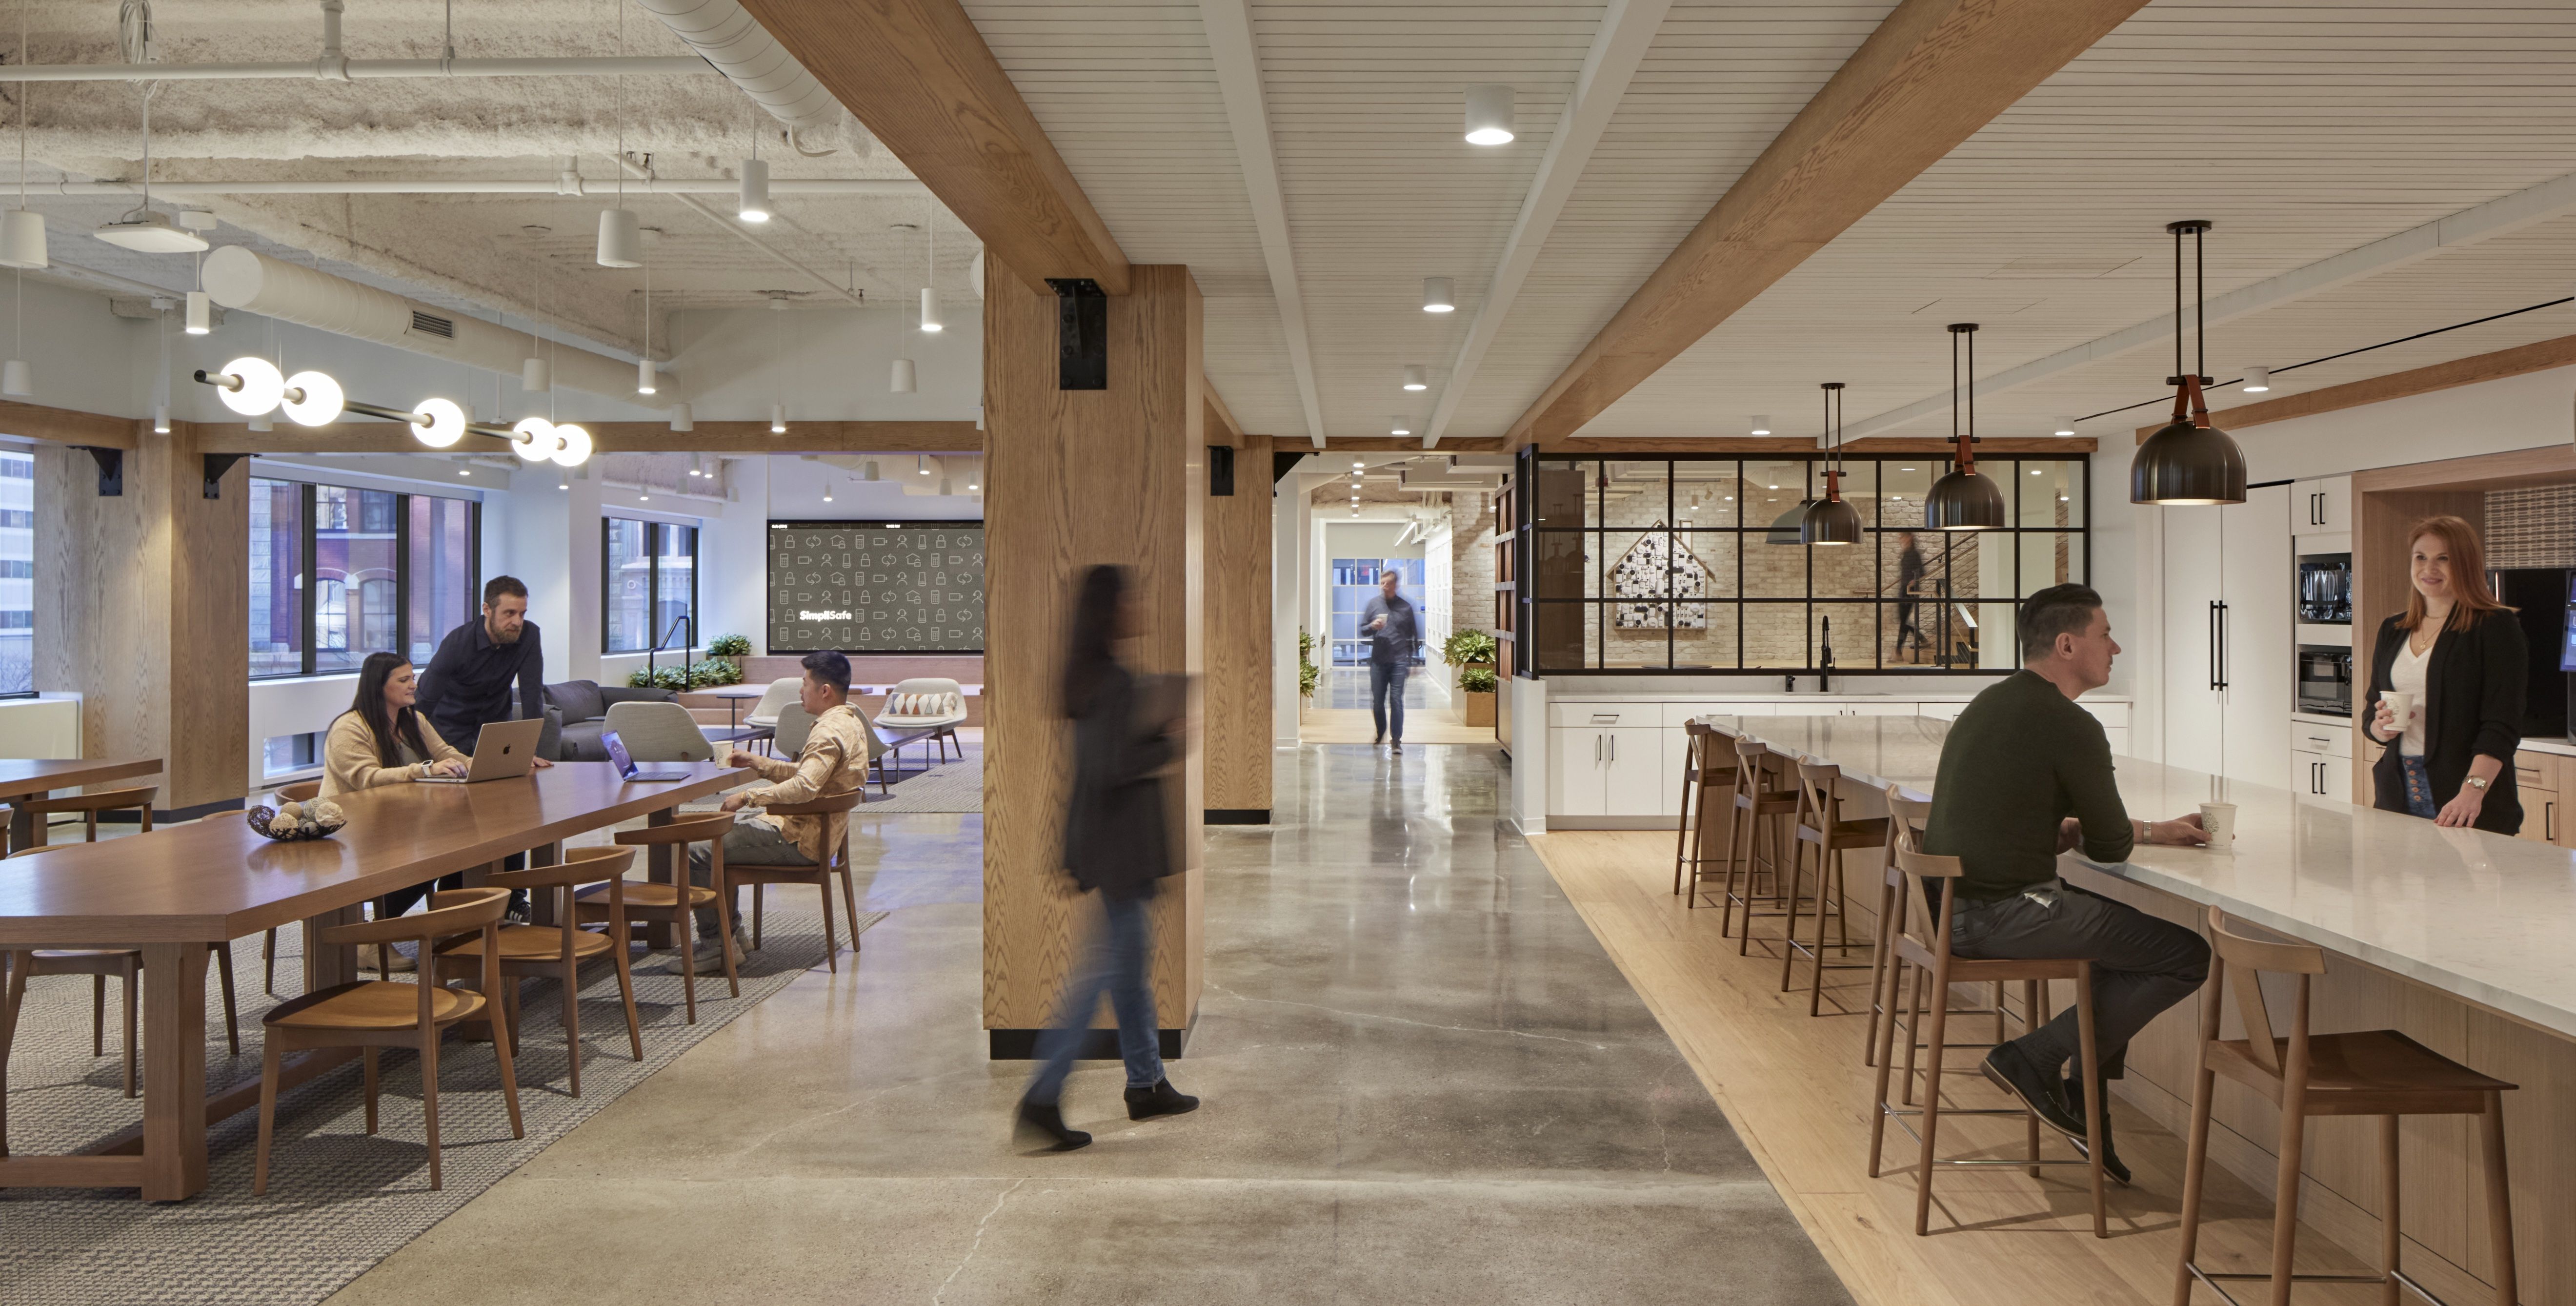 Employees are seen sitting at a long wooden table on the left of the dining area and a sleek white table on the right at SimpliSafe's HQ.